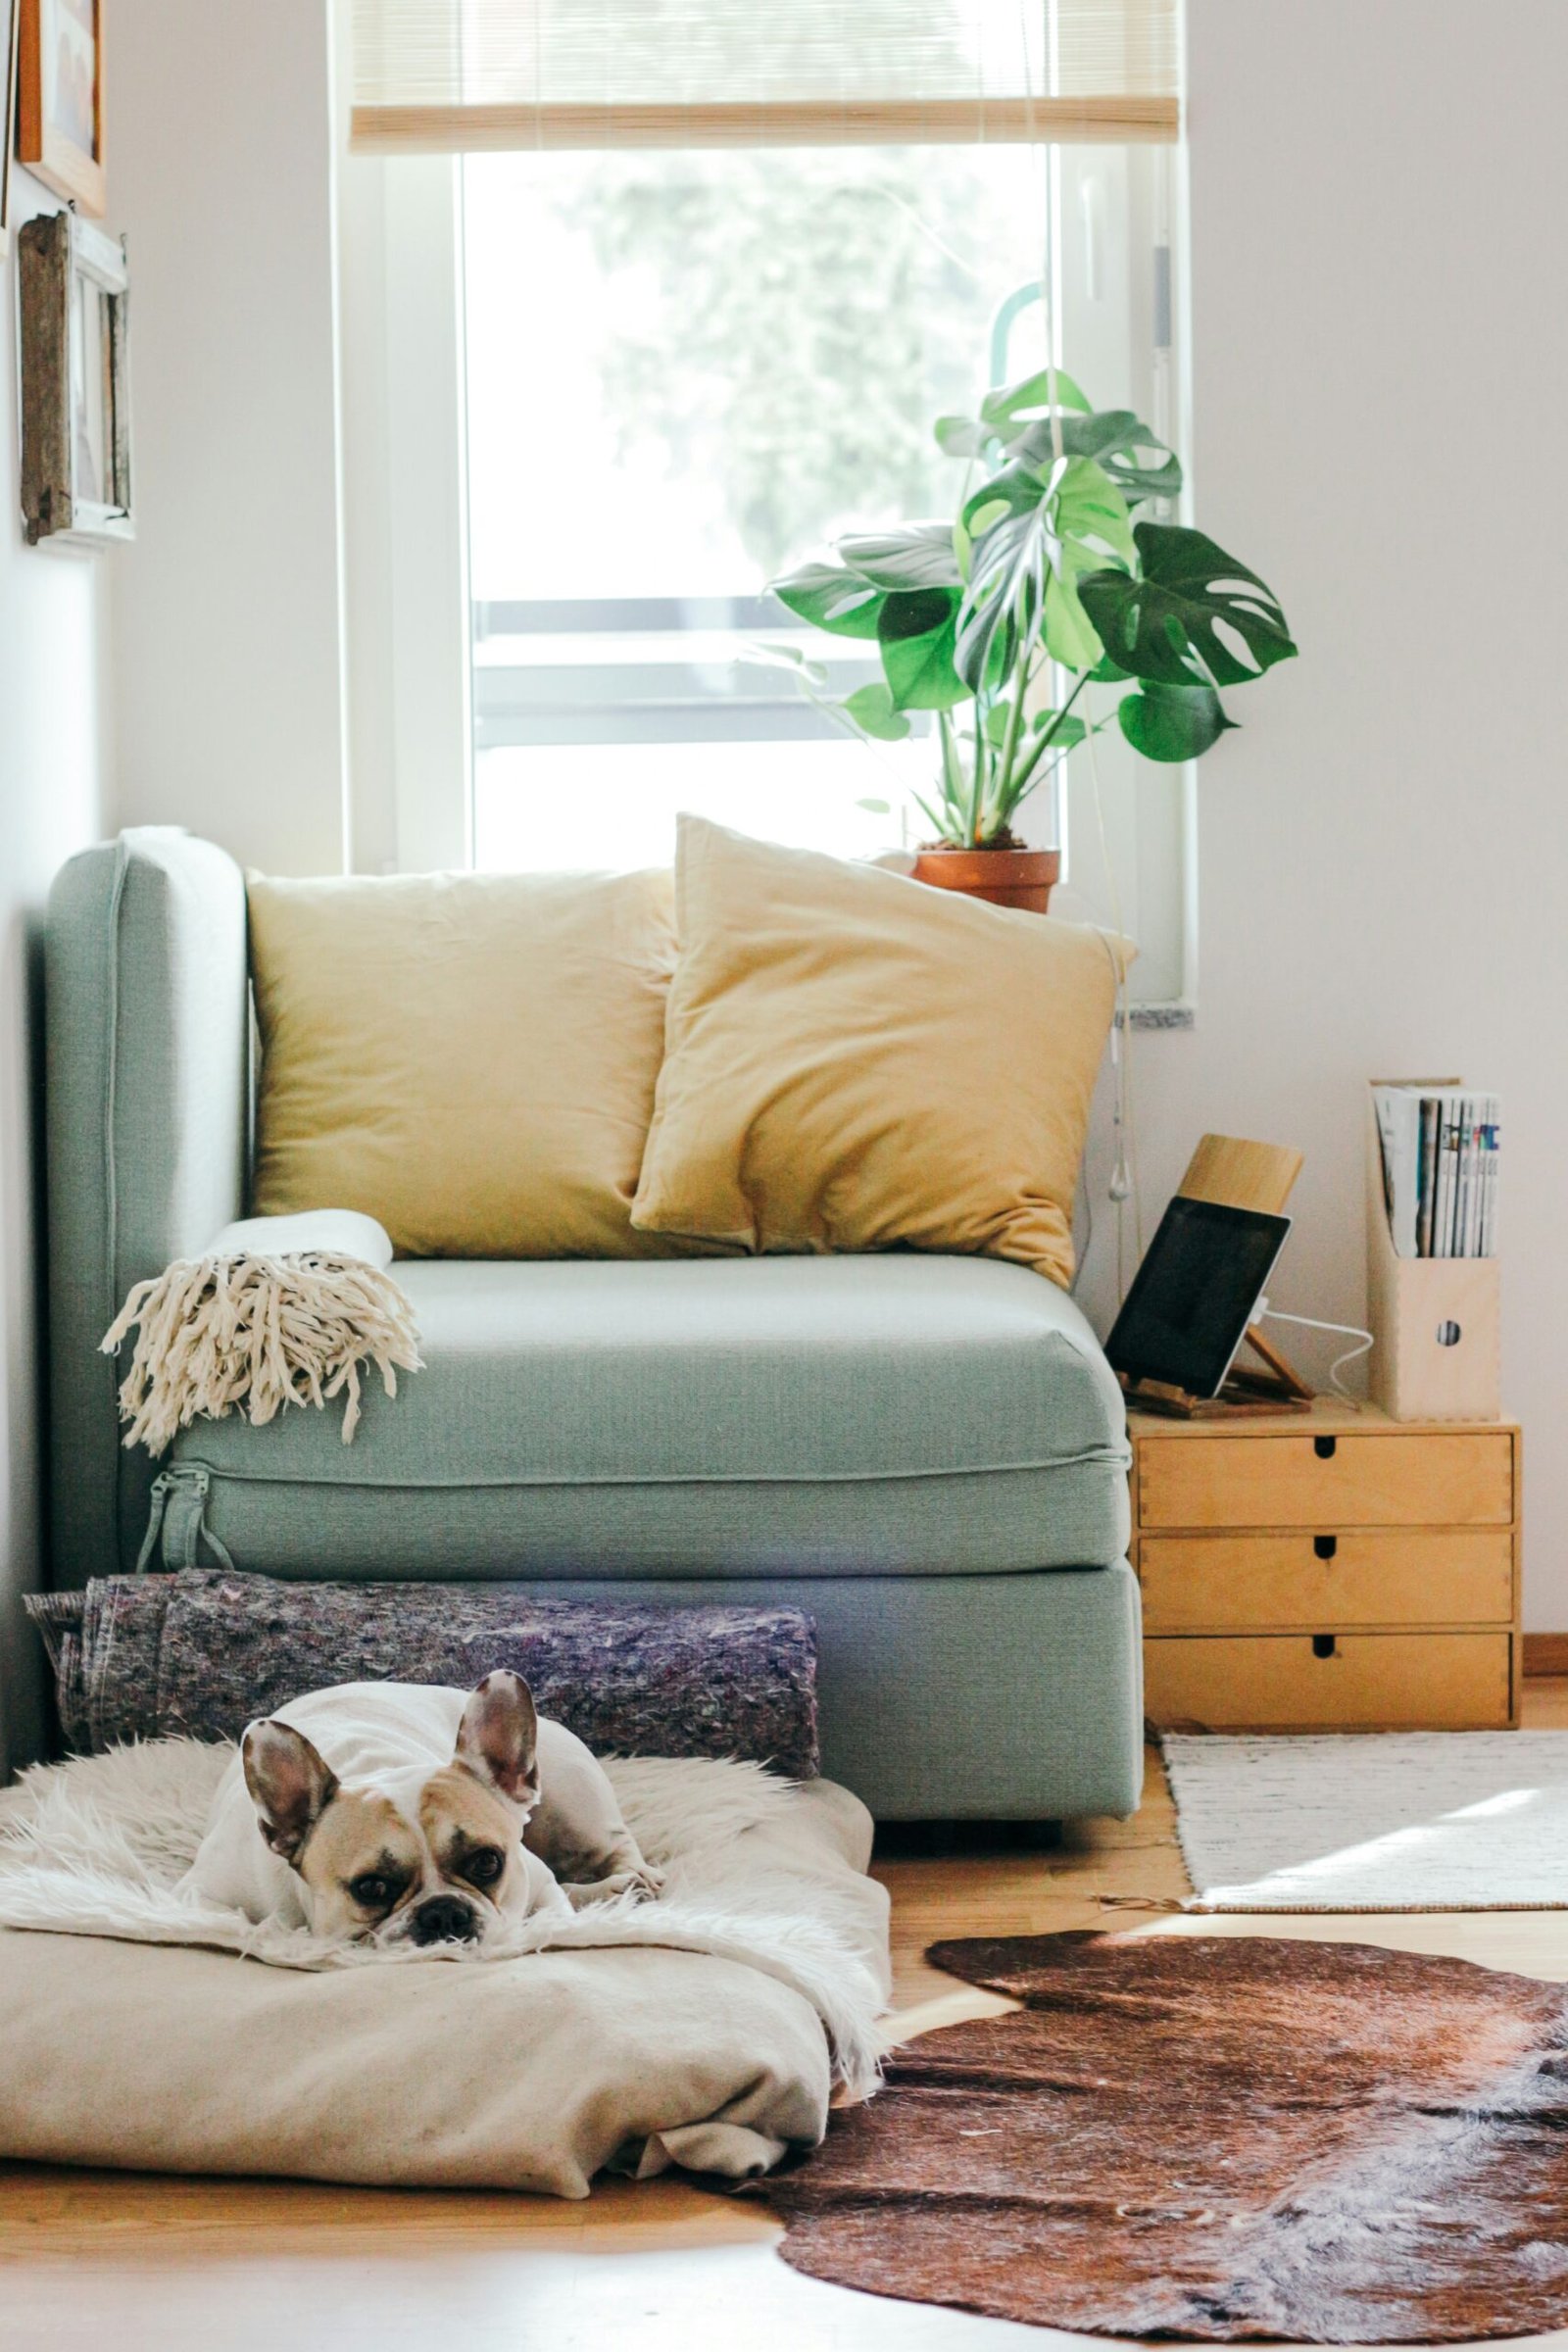 Home Junk Removal: Declutter Your Space with Ease